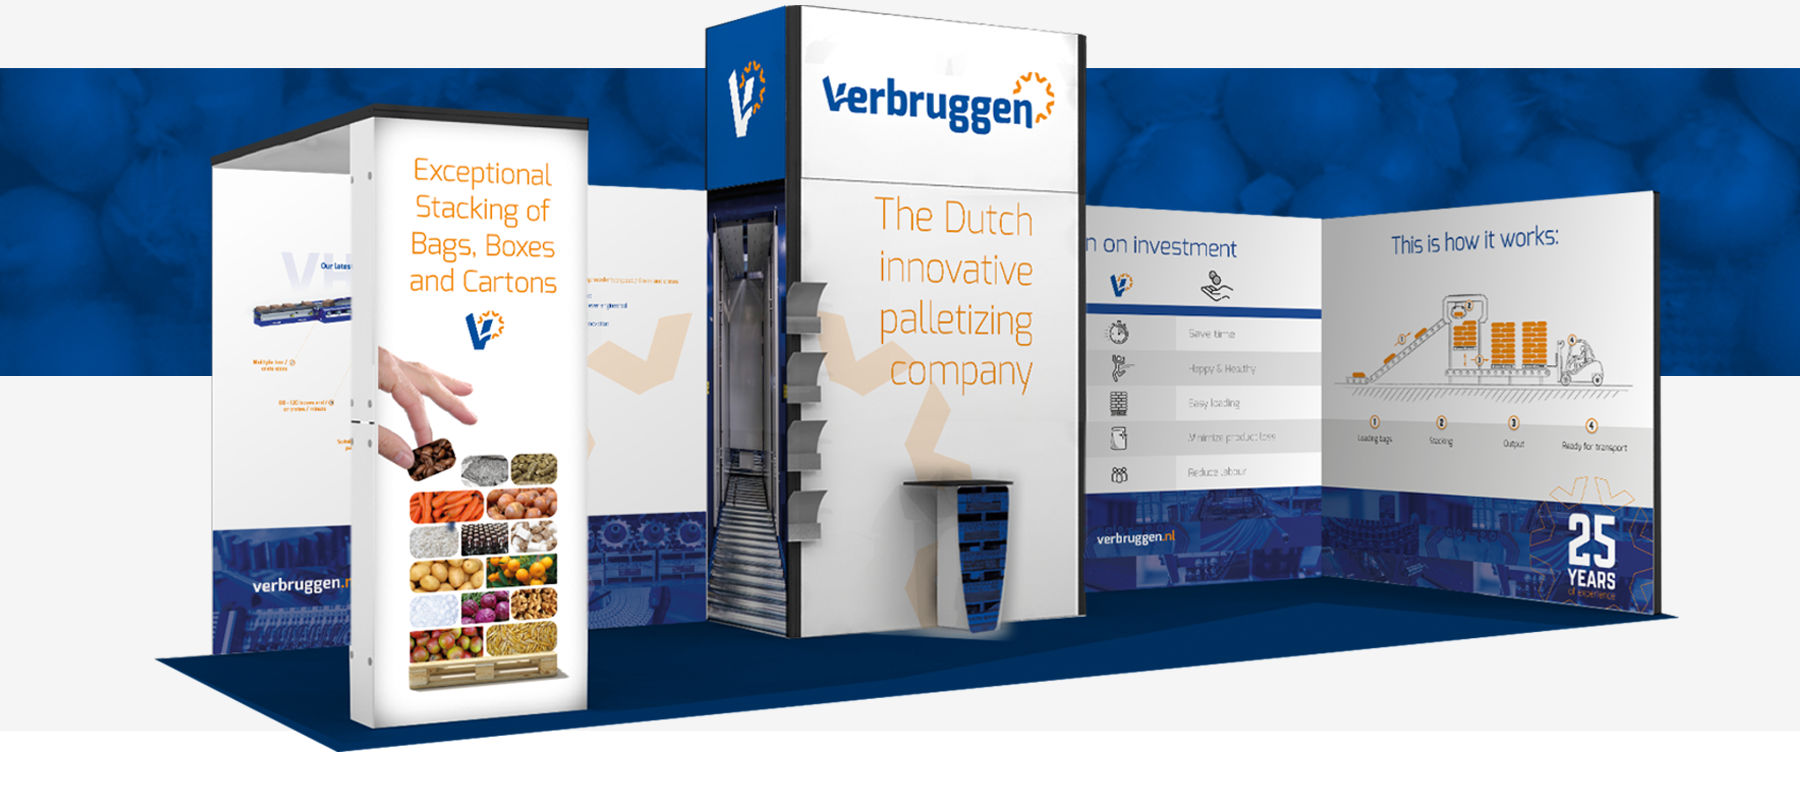 You can ask us anything - Contact with Verbruggen palletizing solutions